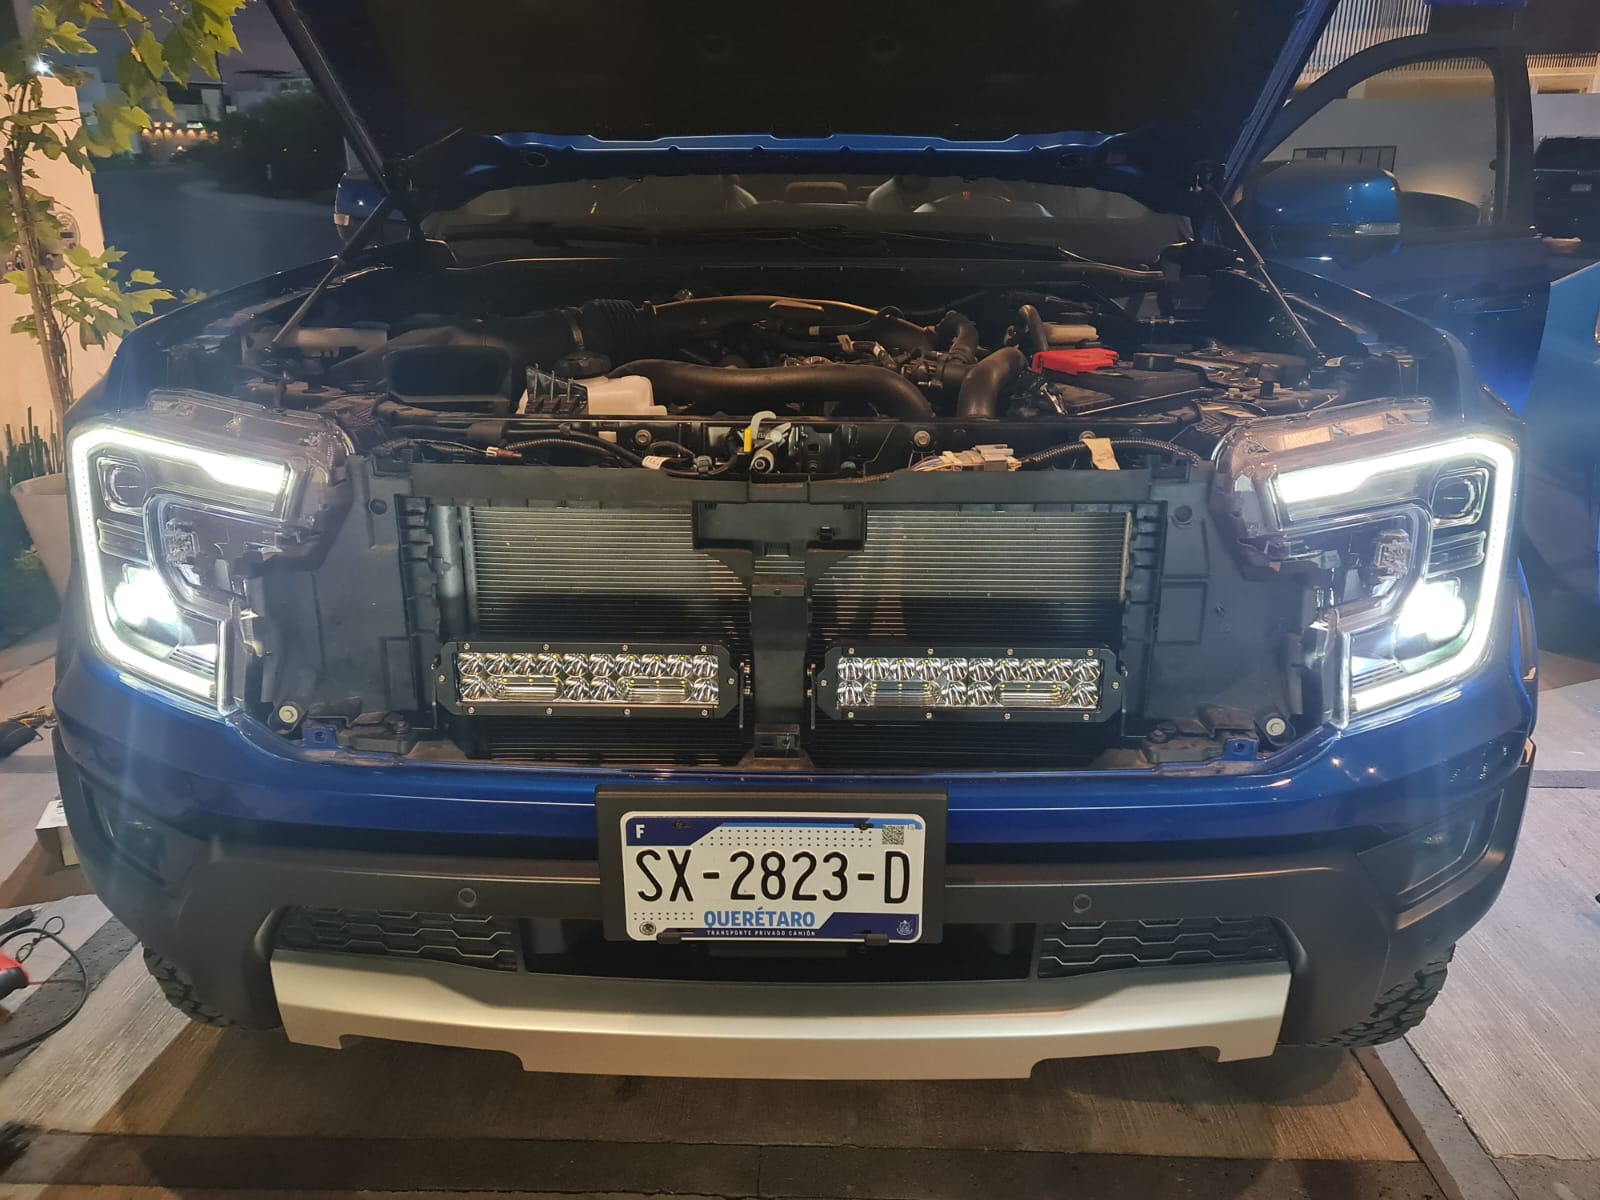 Ford Ranger Who makes Raptor lights for the grill? WhatsApp Image 2023-07-17 at 6.29.56 AM (3)